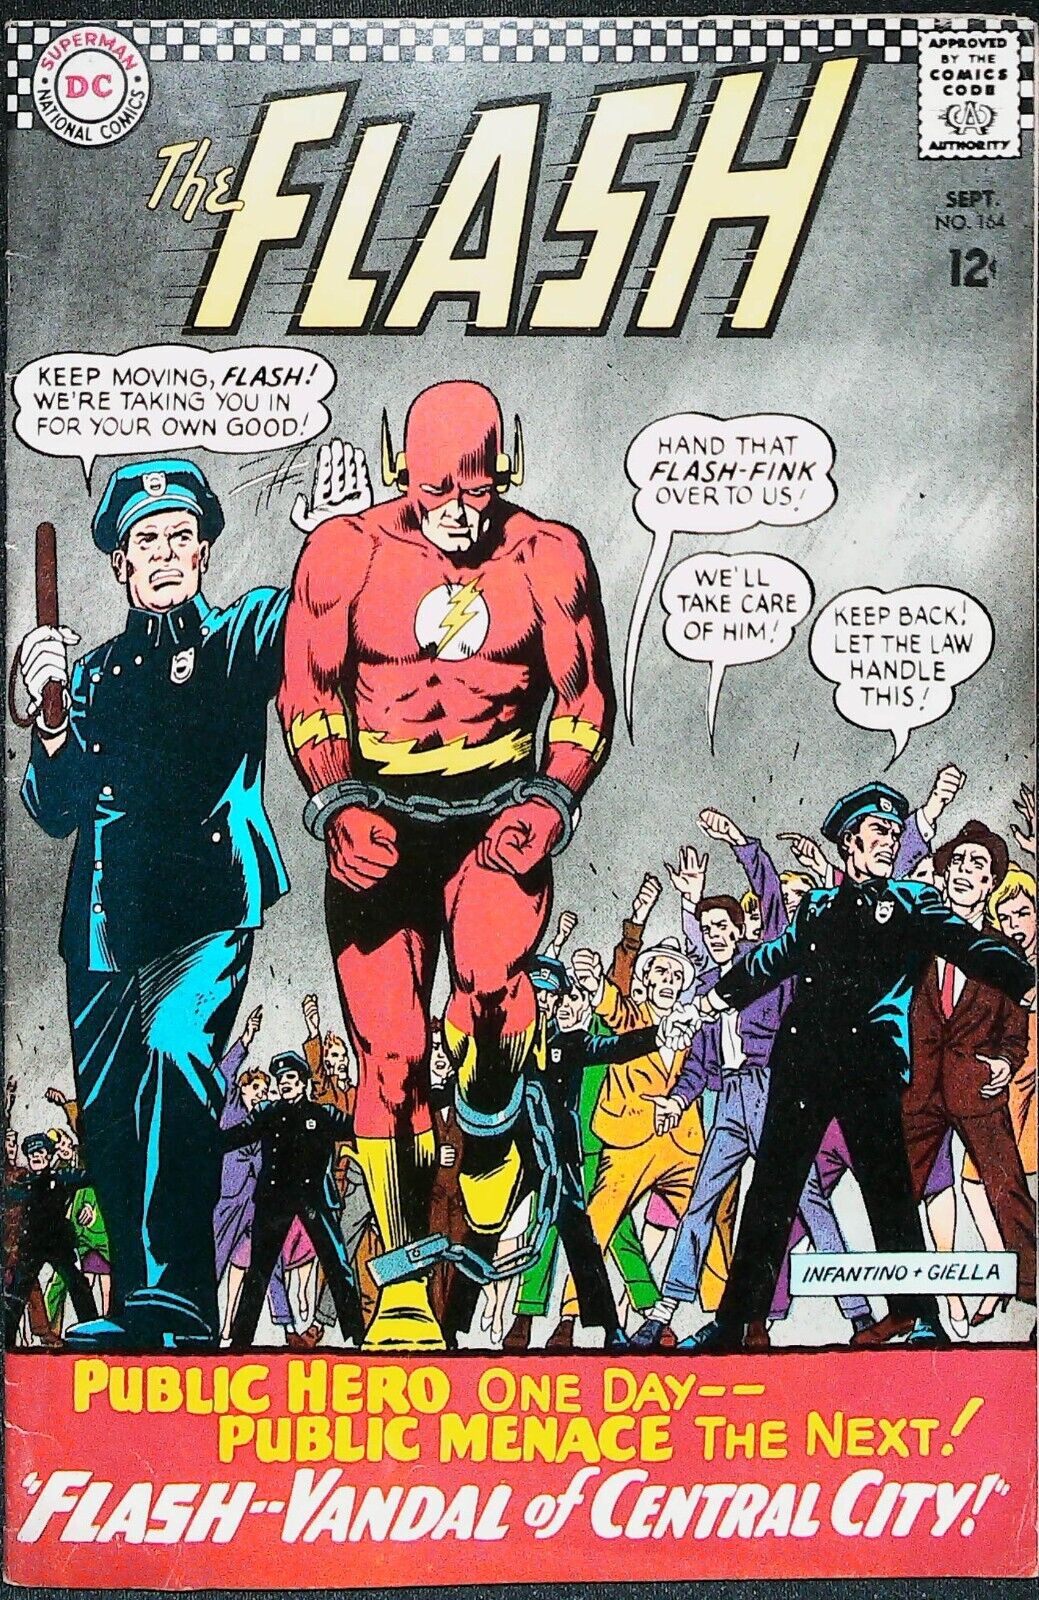 The Flash #164 Vol 1 (1966) - *Pied Piper Appearance* - Mid Grade